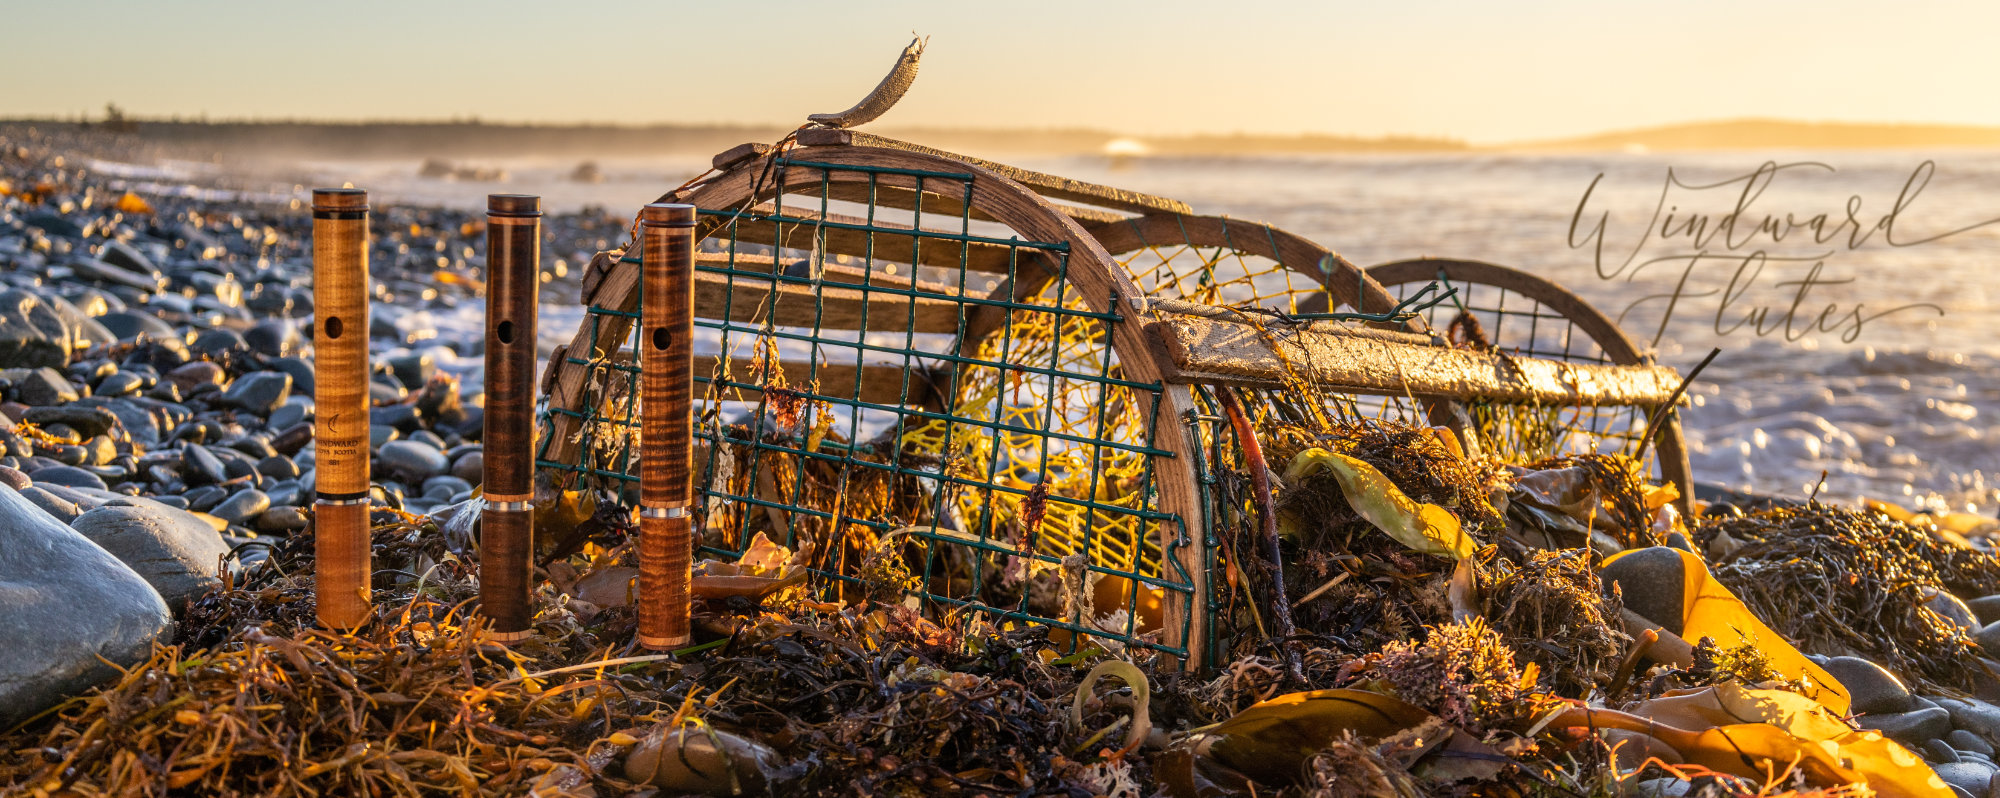 Three Canadian Thermally treated headjoints in front of a lobster trap at sunrise on stony beach